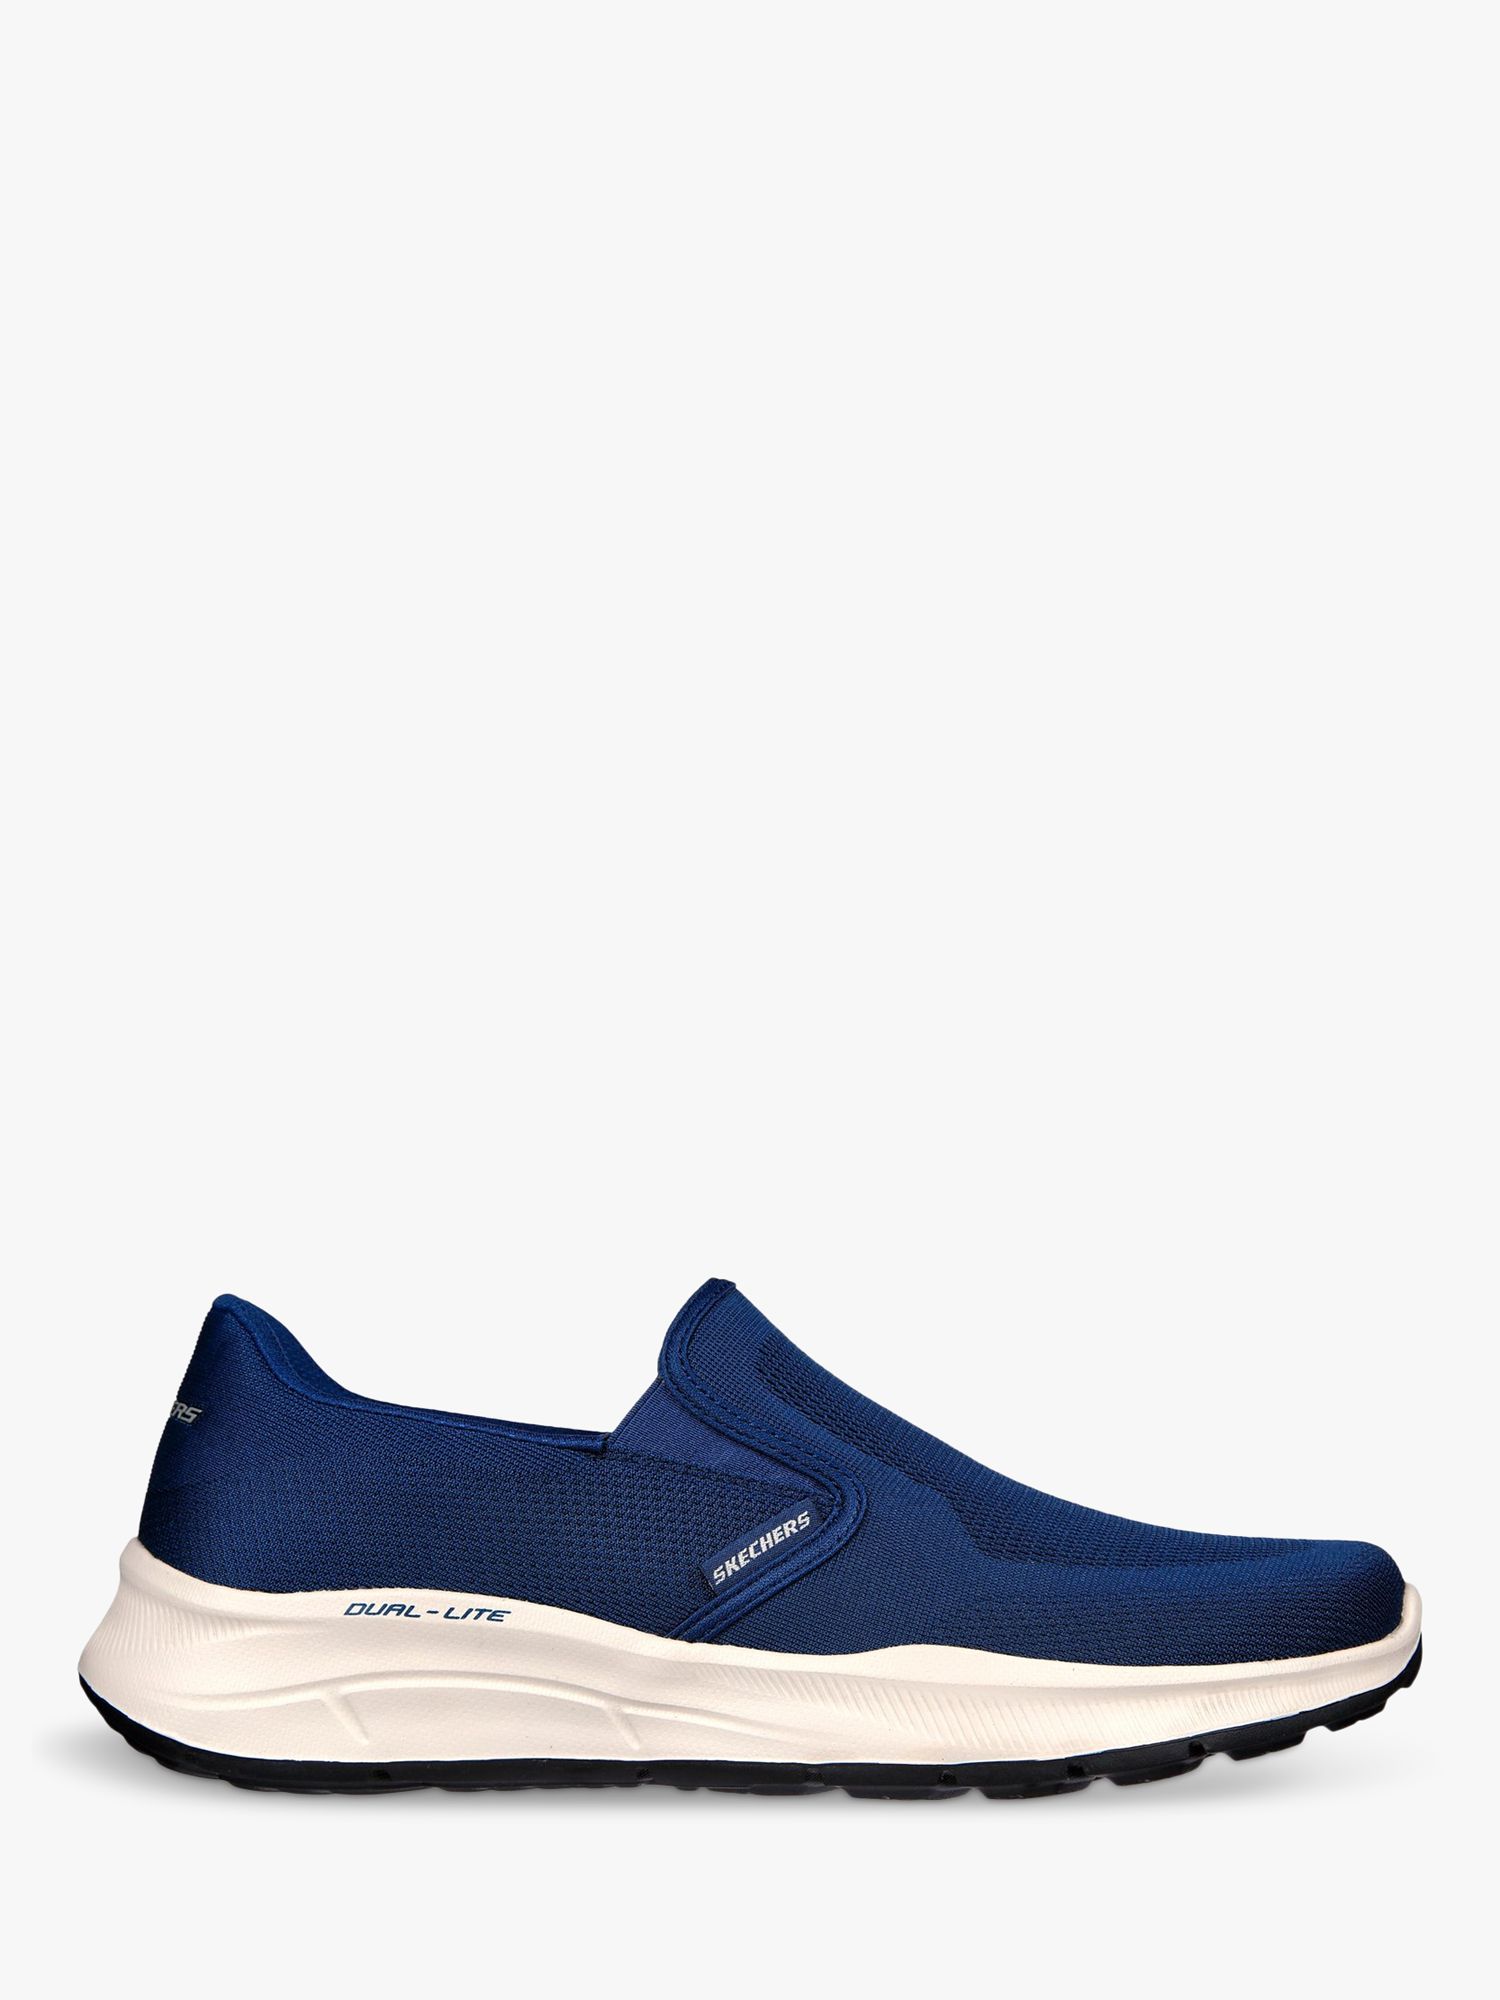 Skechers Equalizer 5.0 Grand Legacy Trainers, Navy, 6